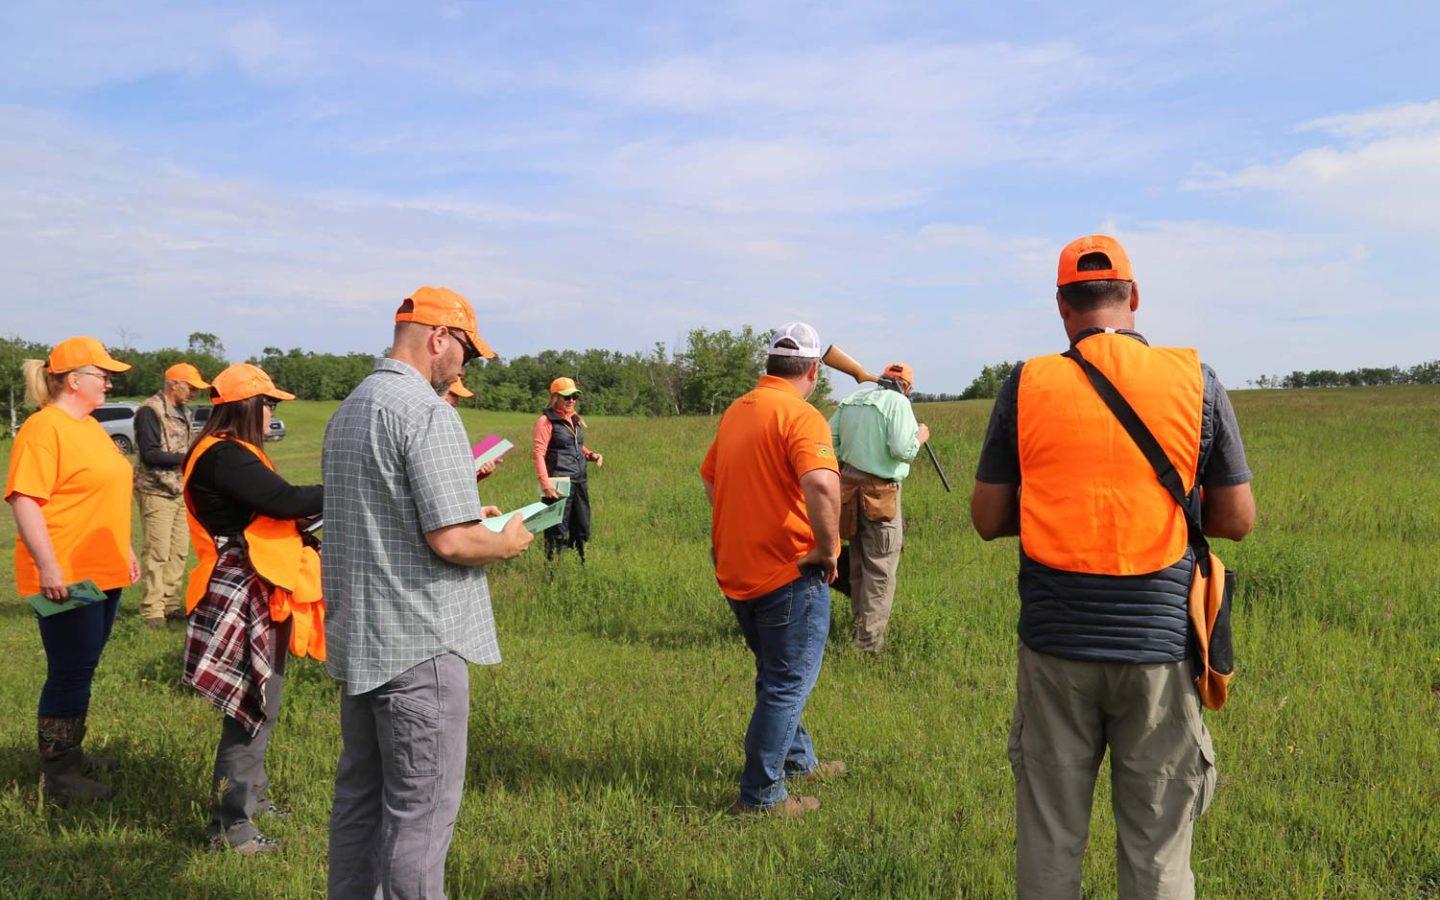 a group of people in bright orange clothing standing in a green open field